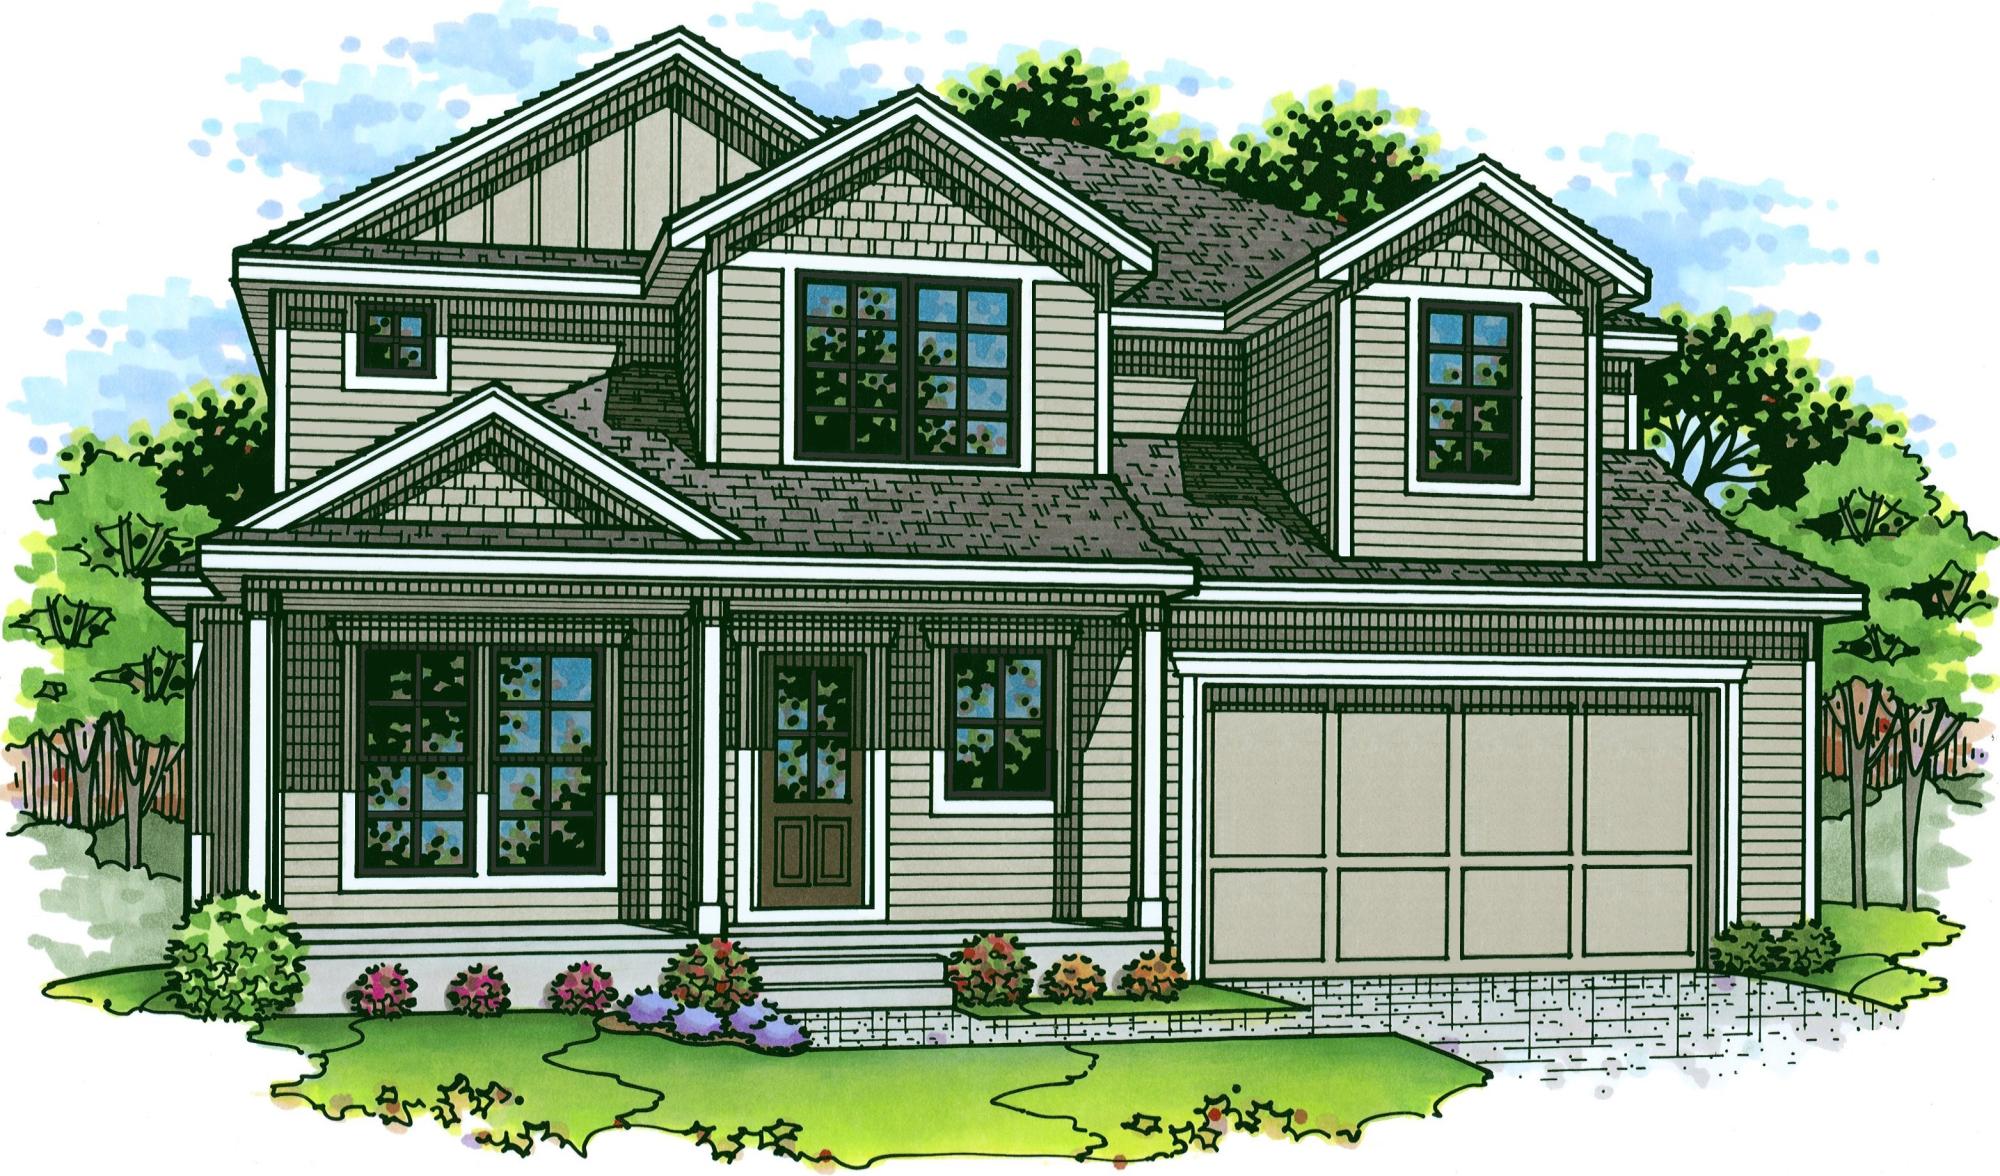 Color rendering of the sequoia expanded model from lambie homes